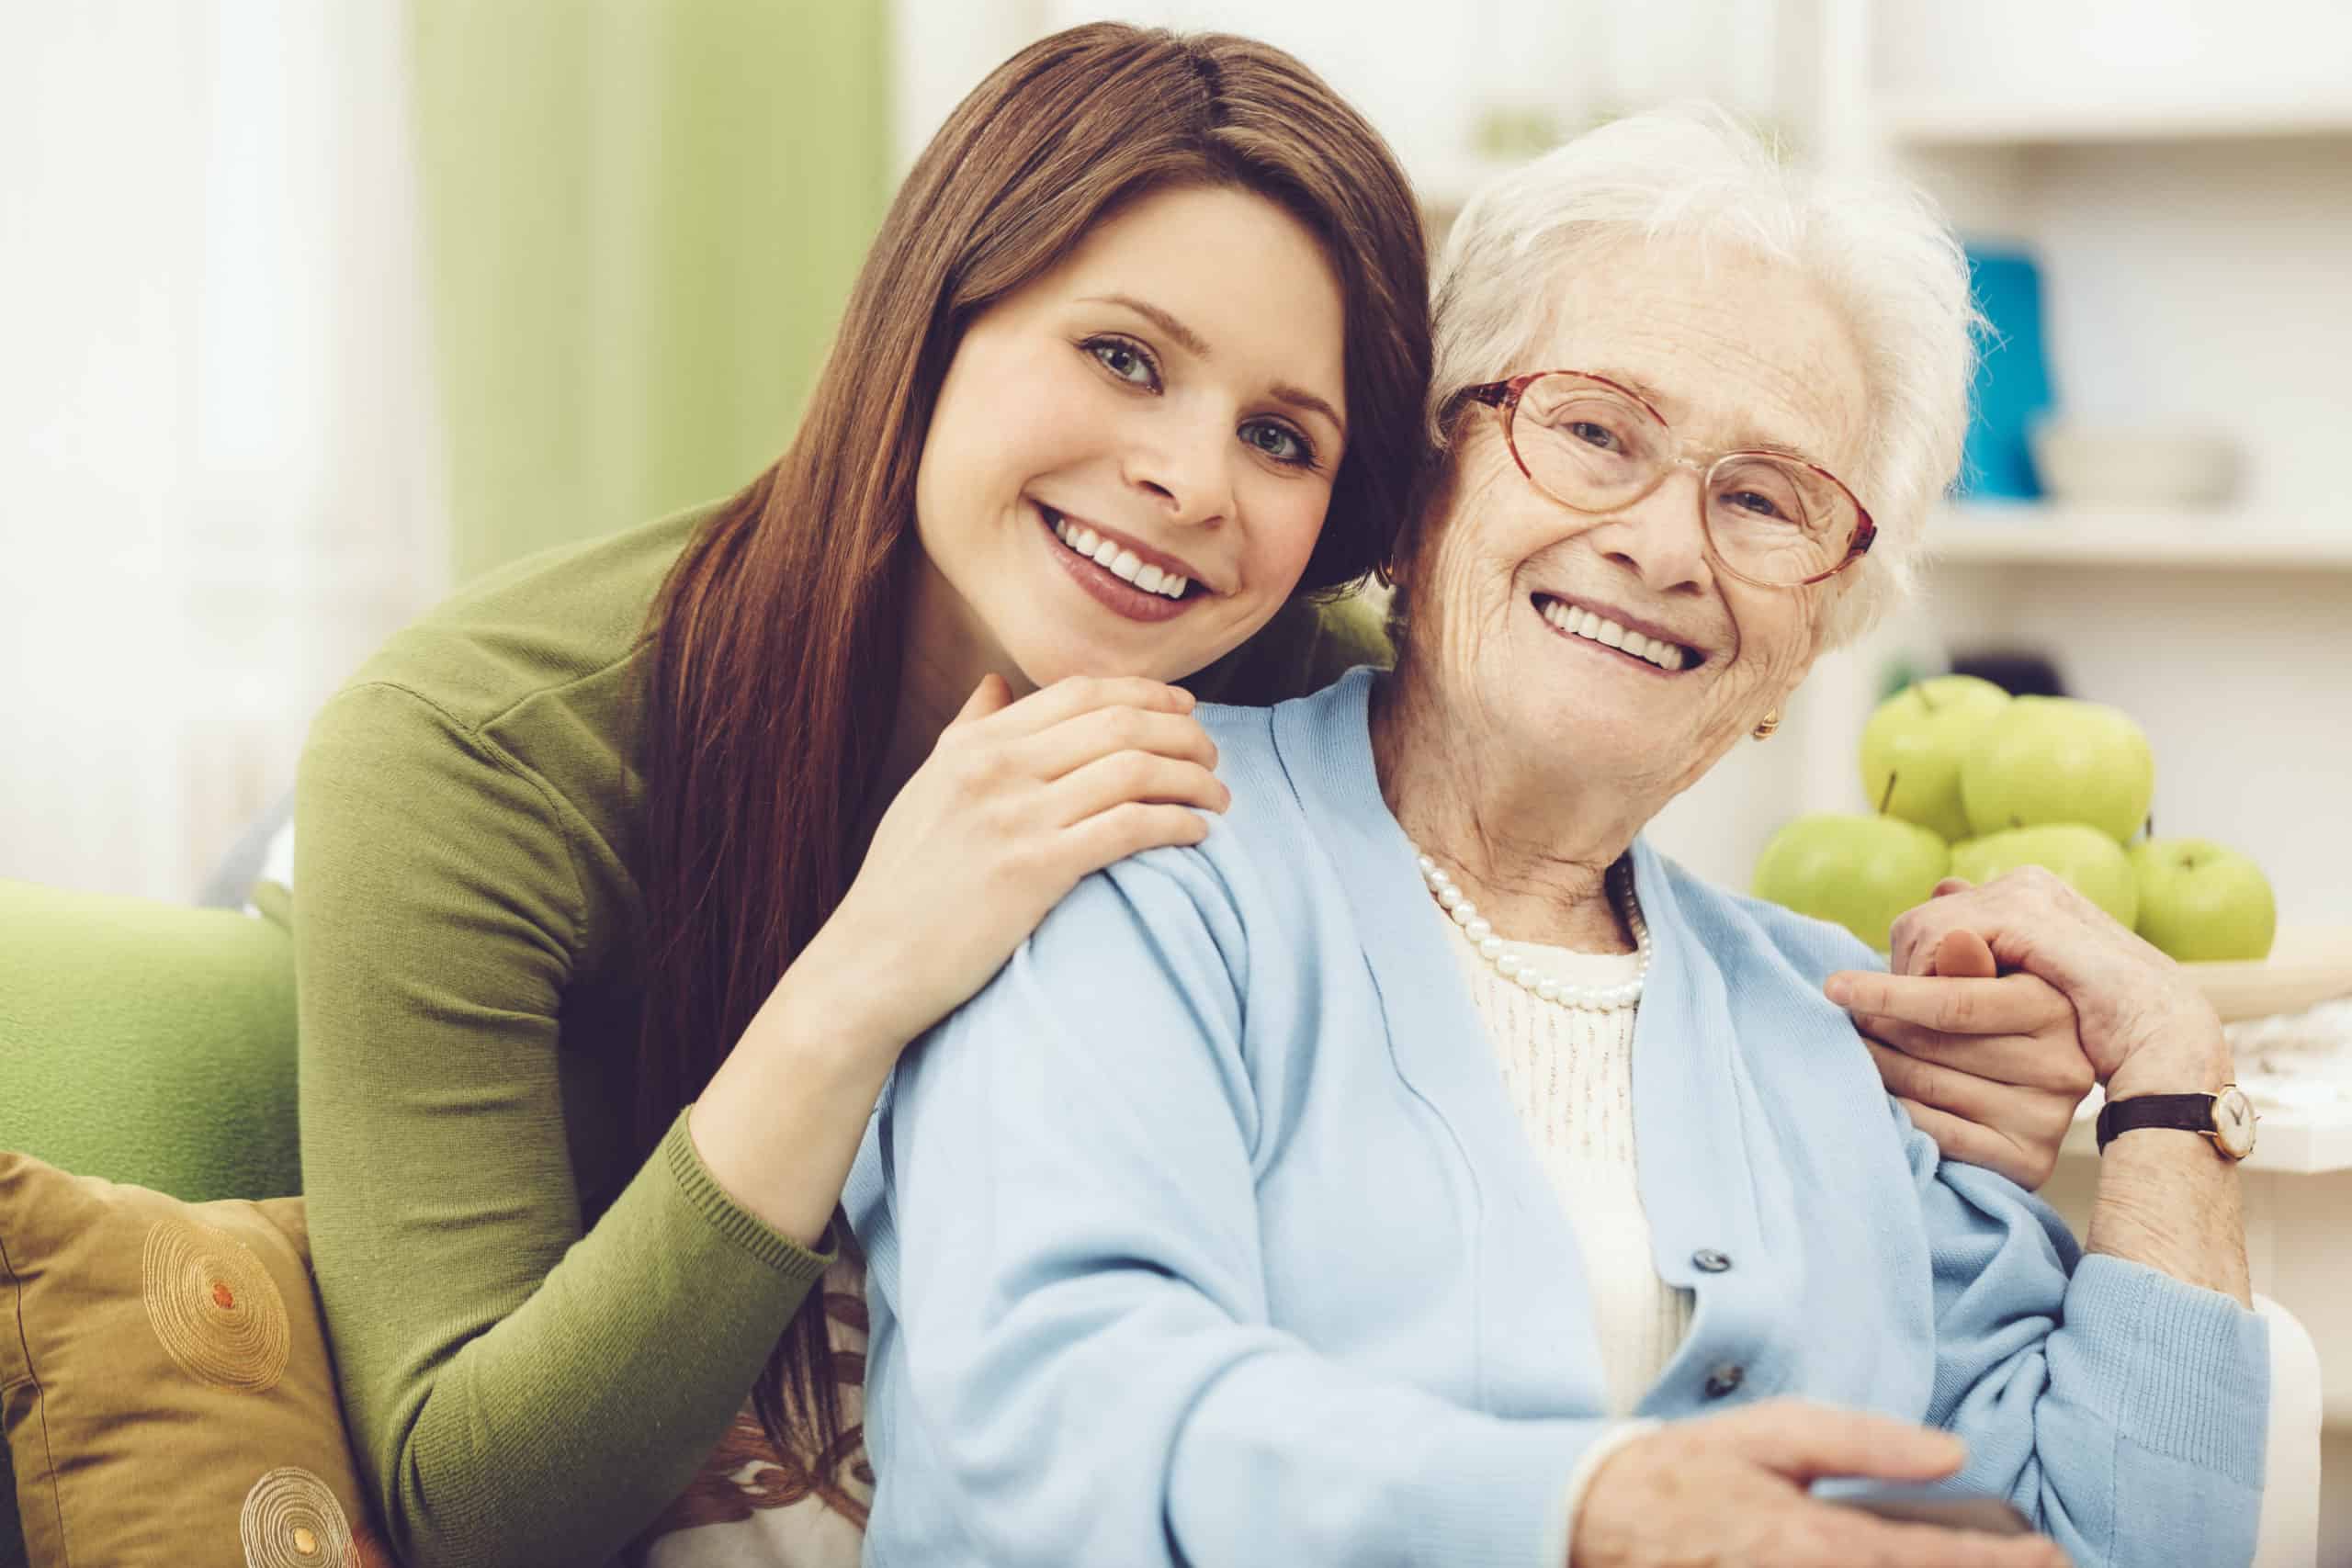 Younger woman embracing older woman